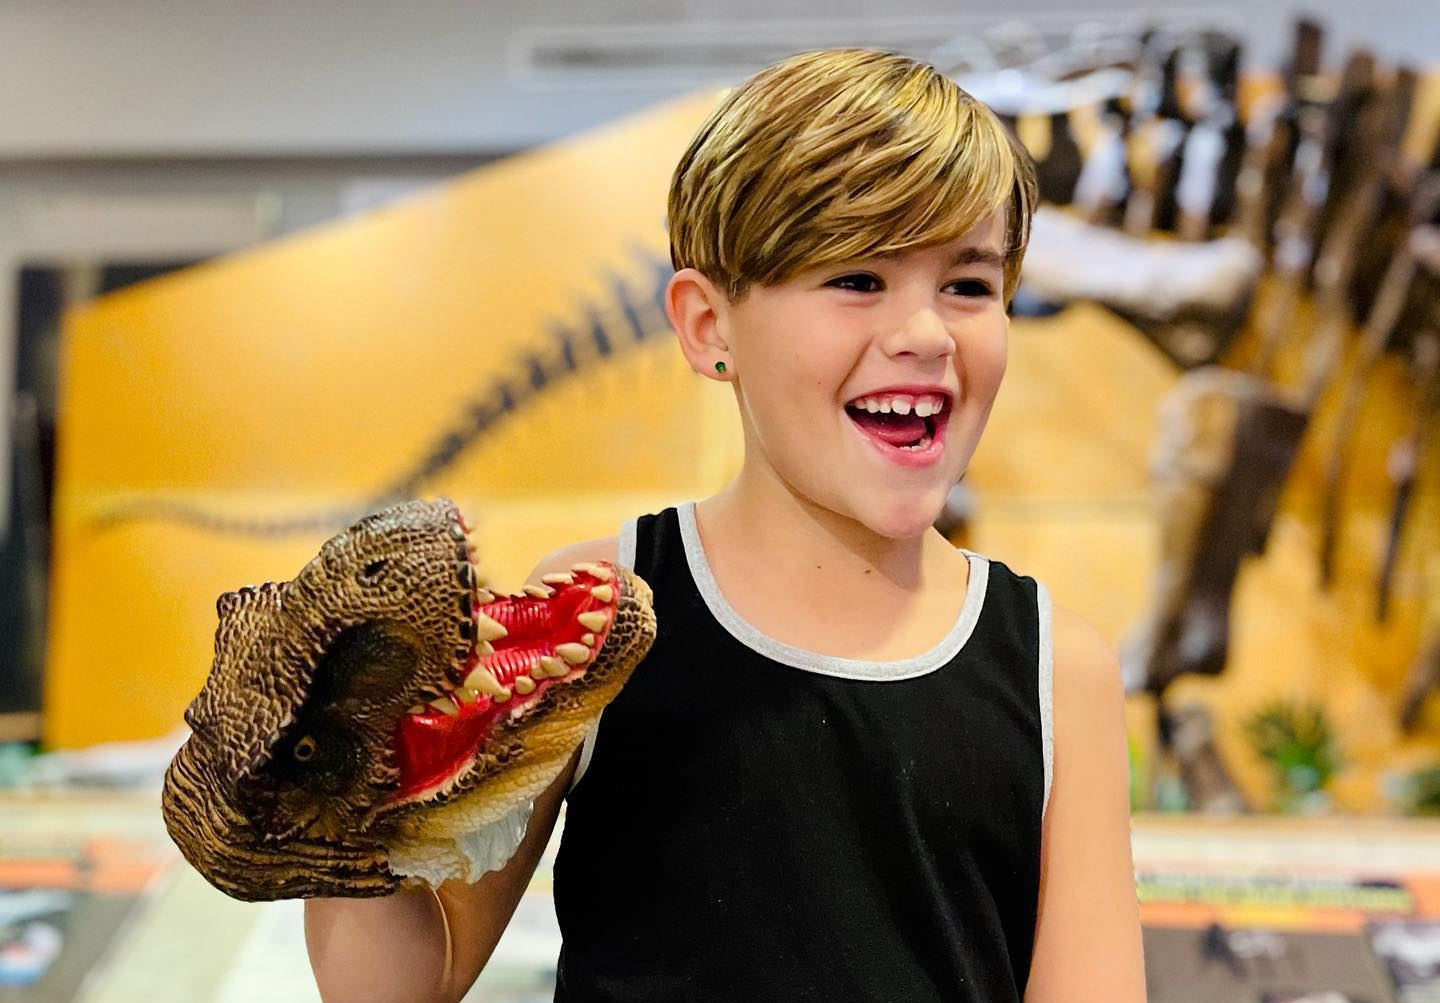 Your kids will love Jurassic Camp at the Mall at Wellington Green